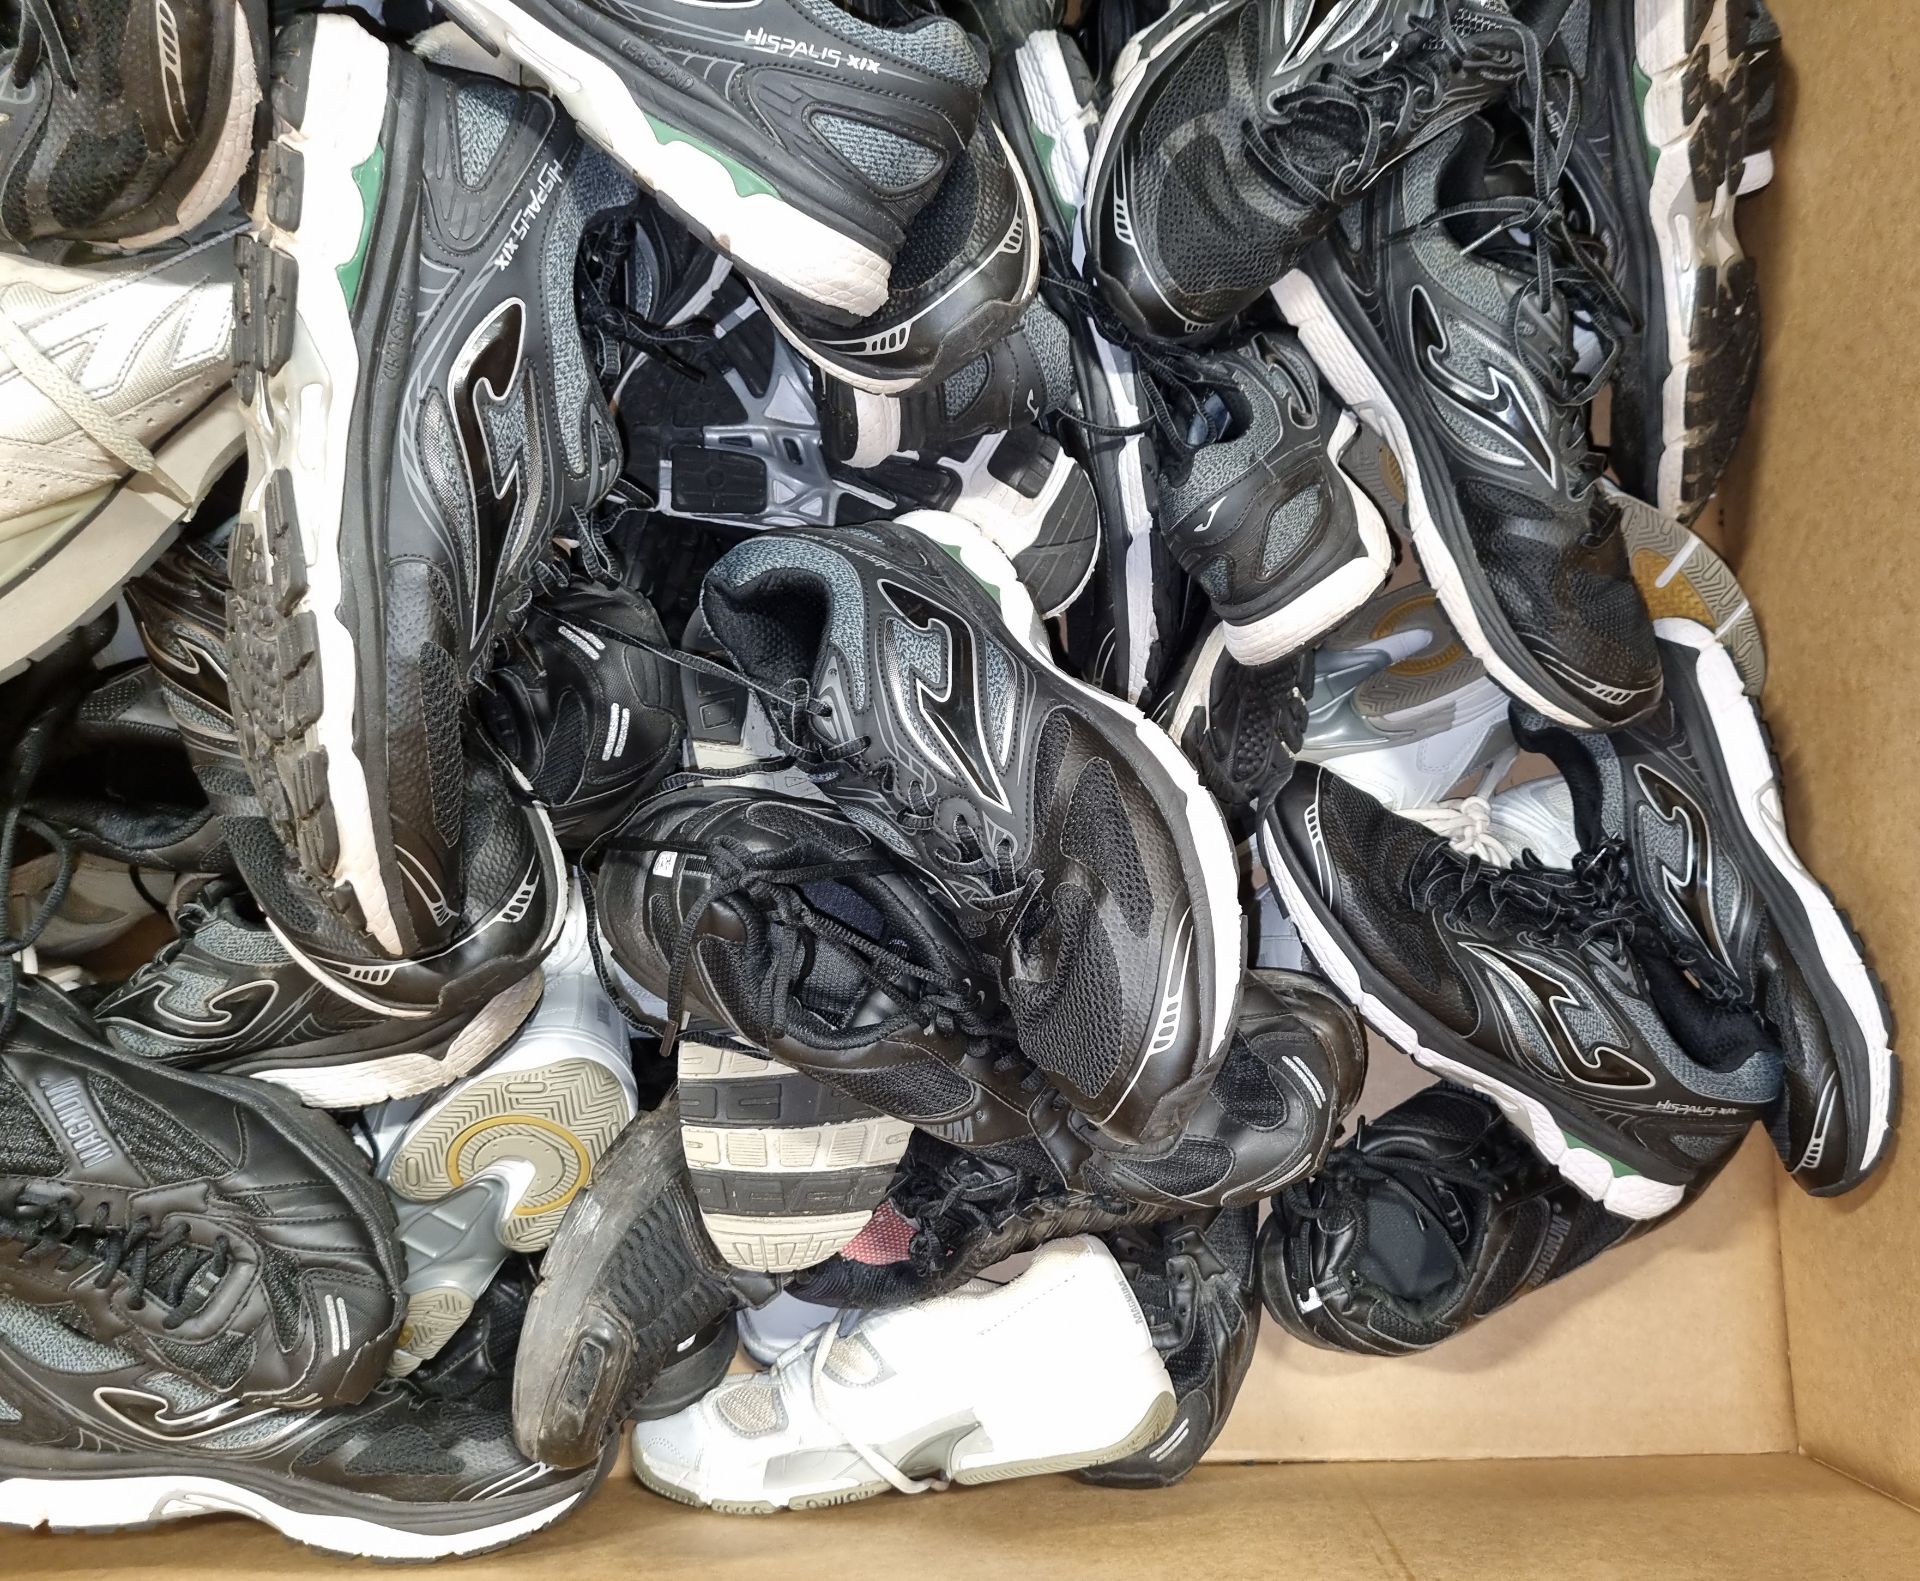 50x pairs of various trainers - different makes & sizes - mixed grades - Image 4 of 5